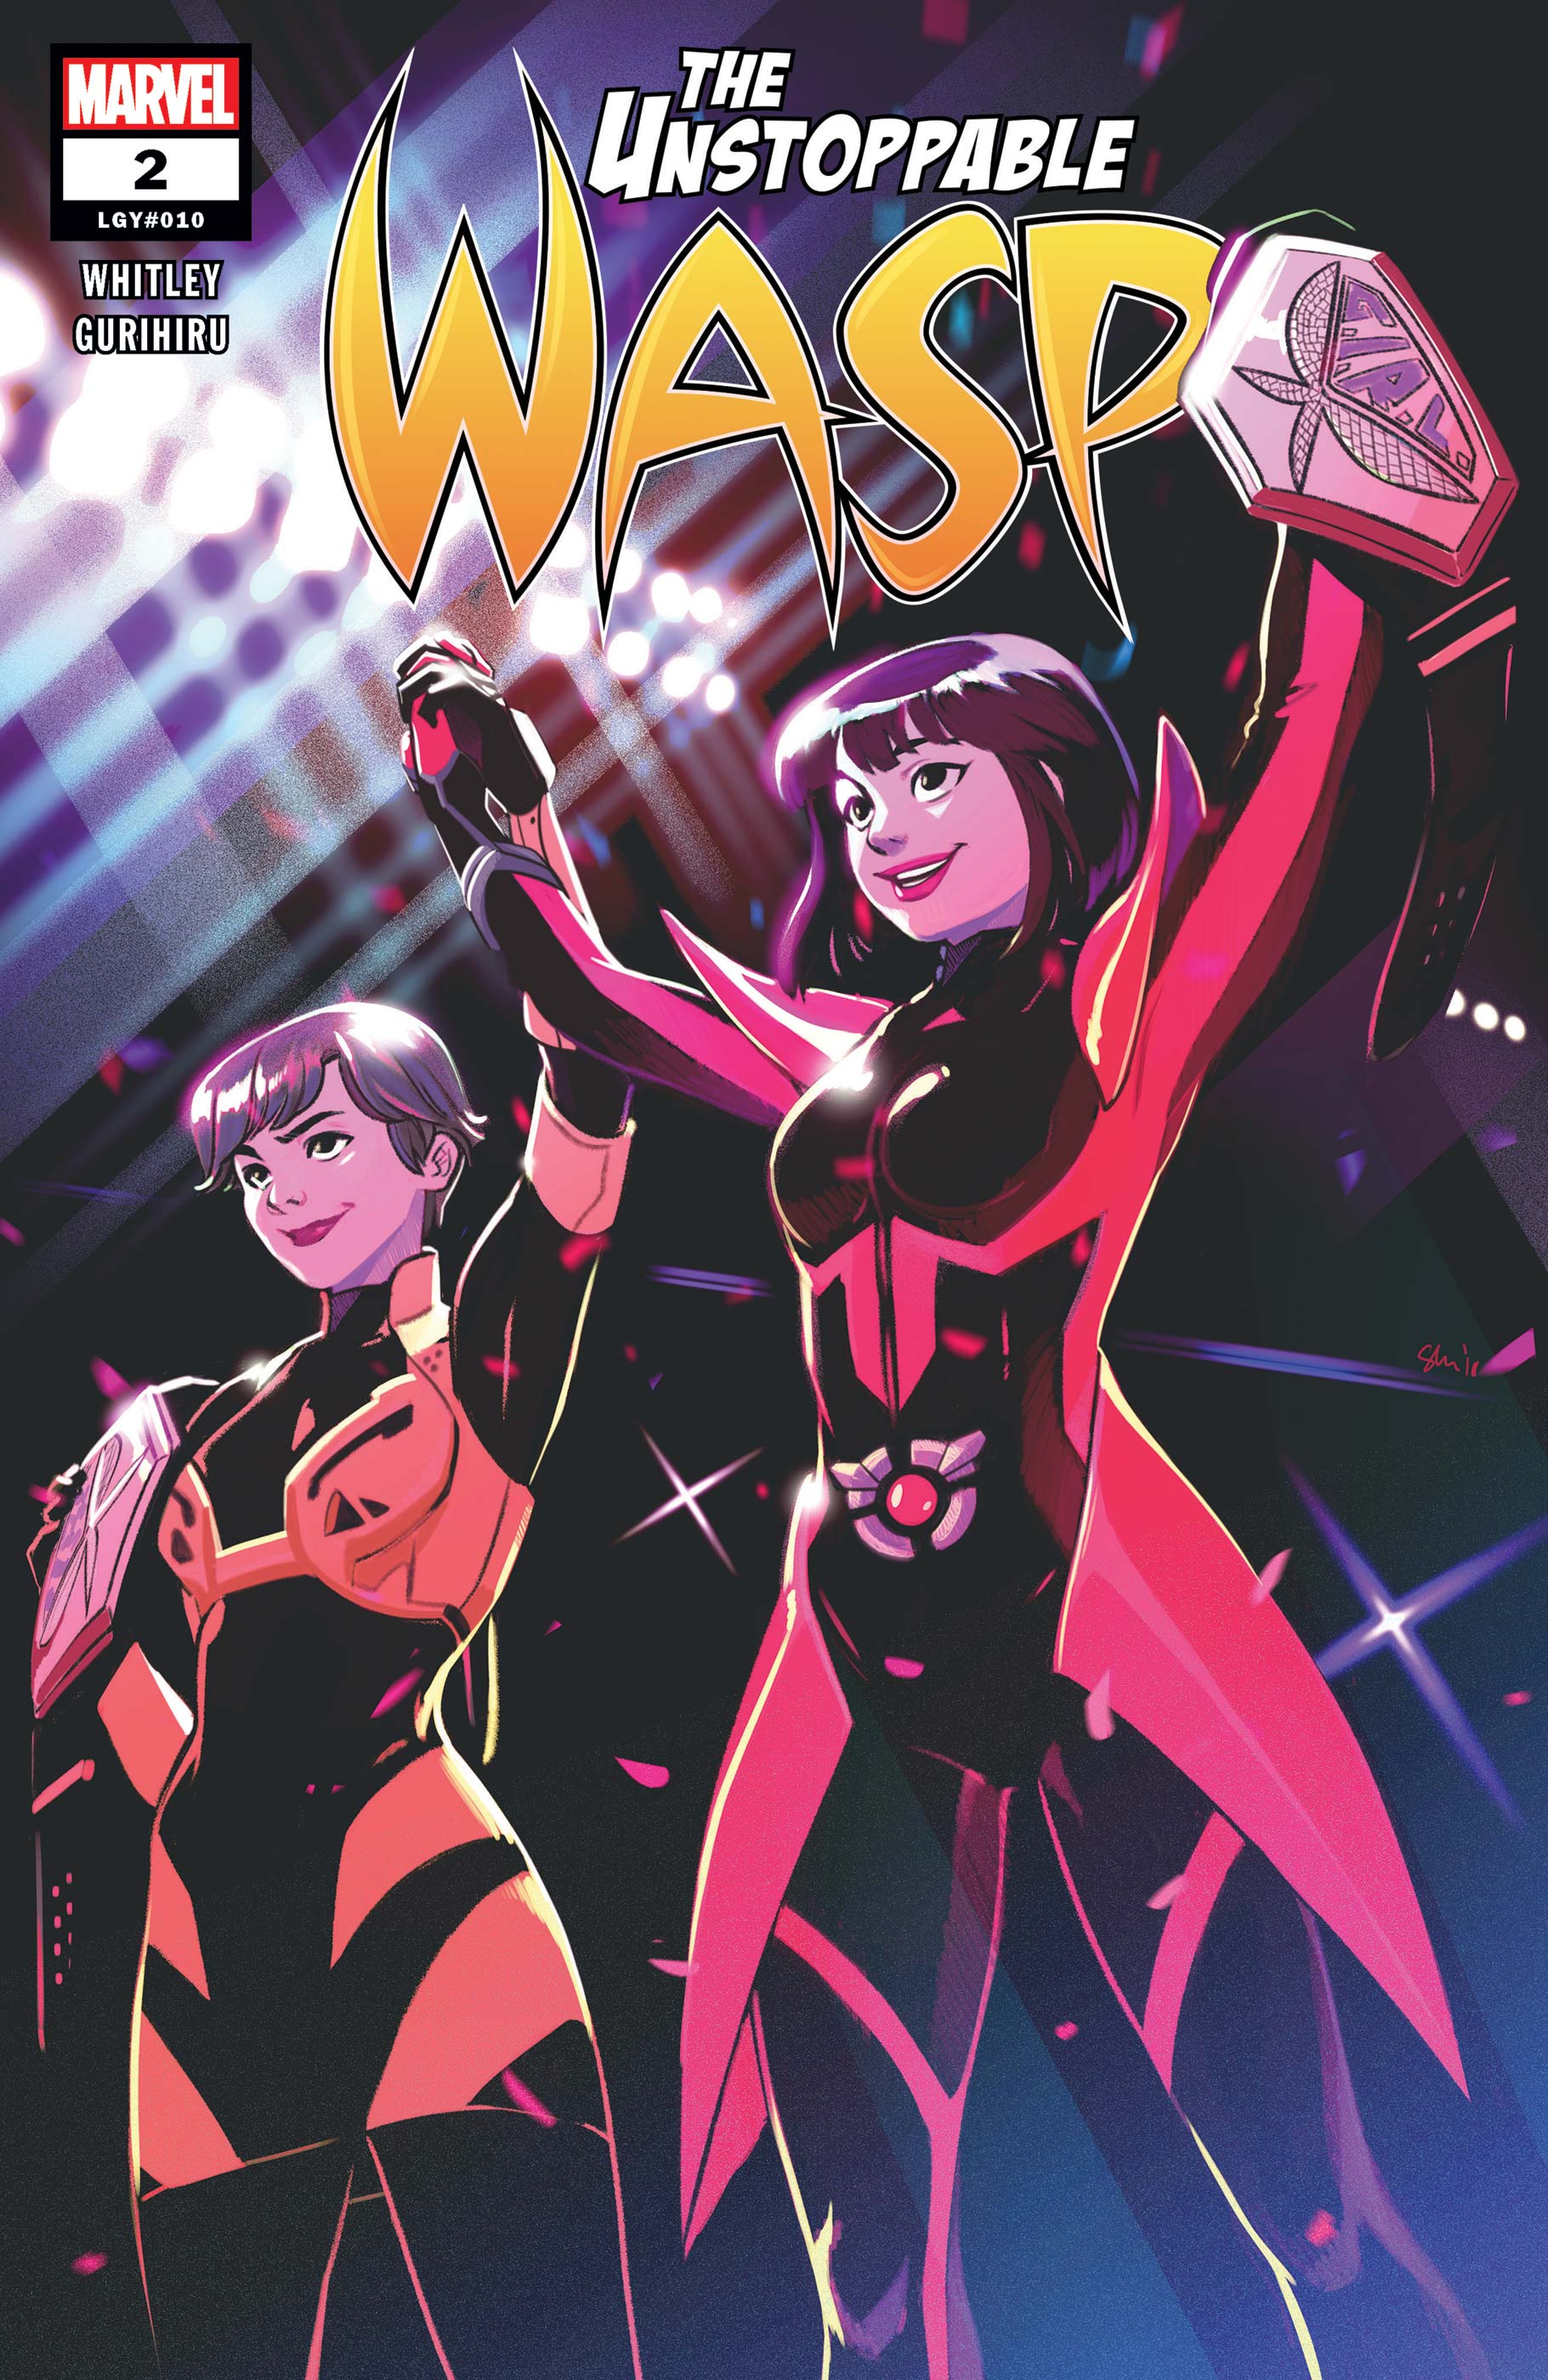 The Unstoppable Wasp (2018) #2